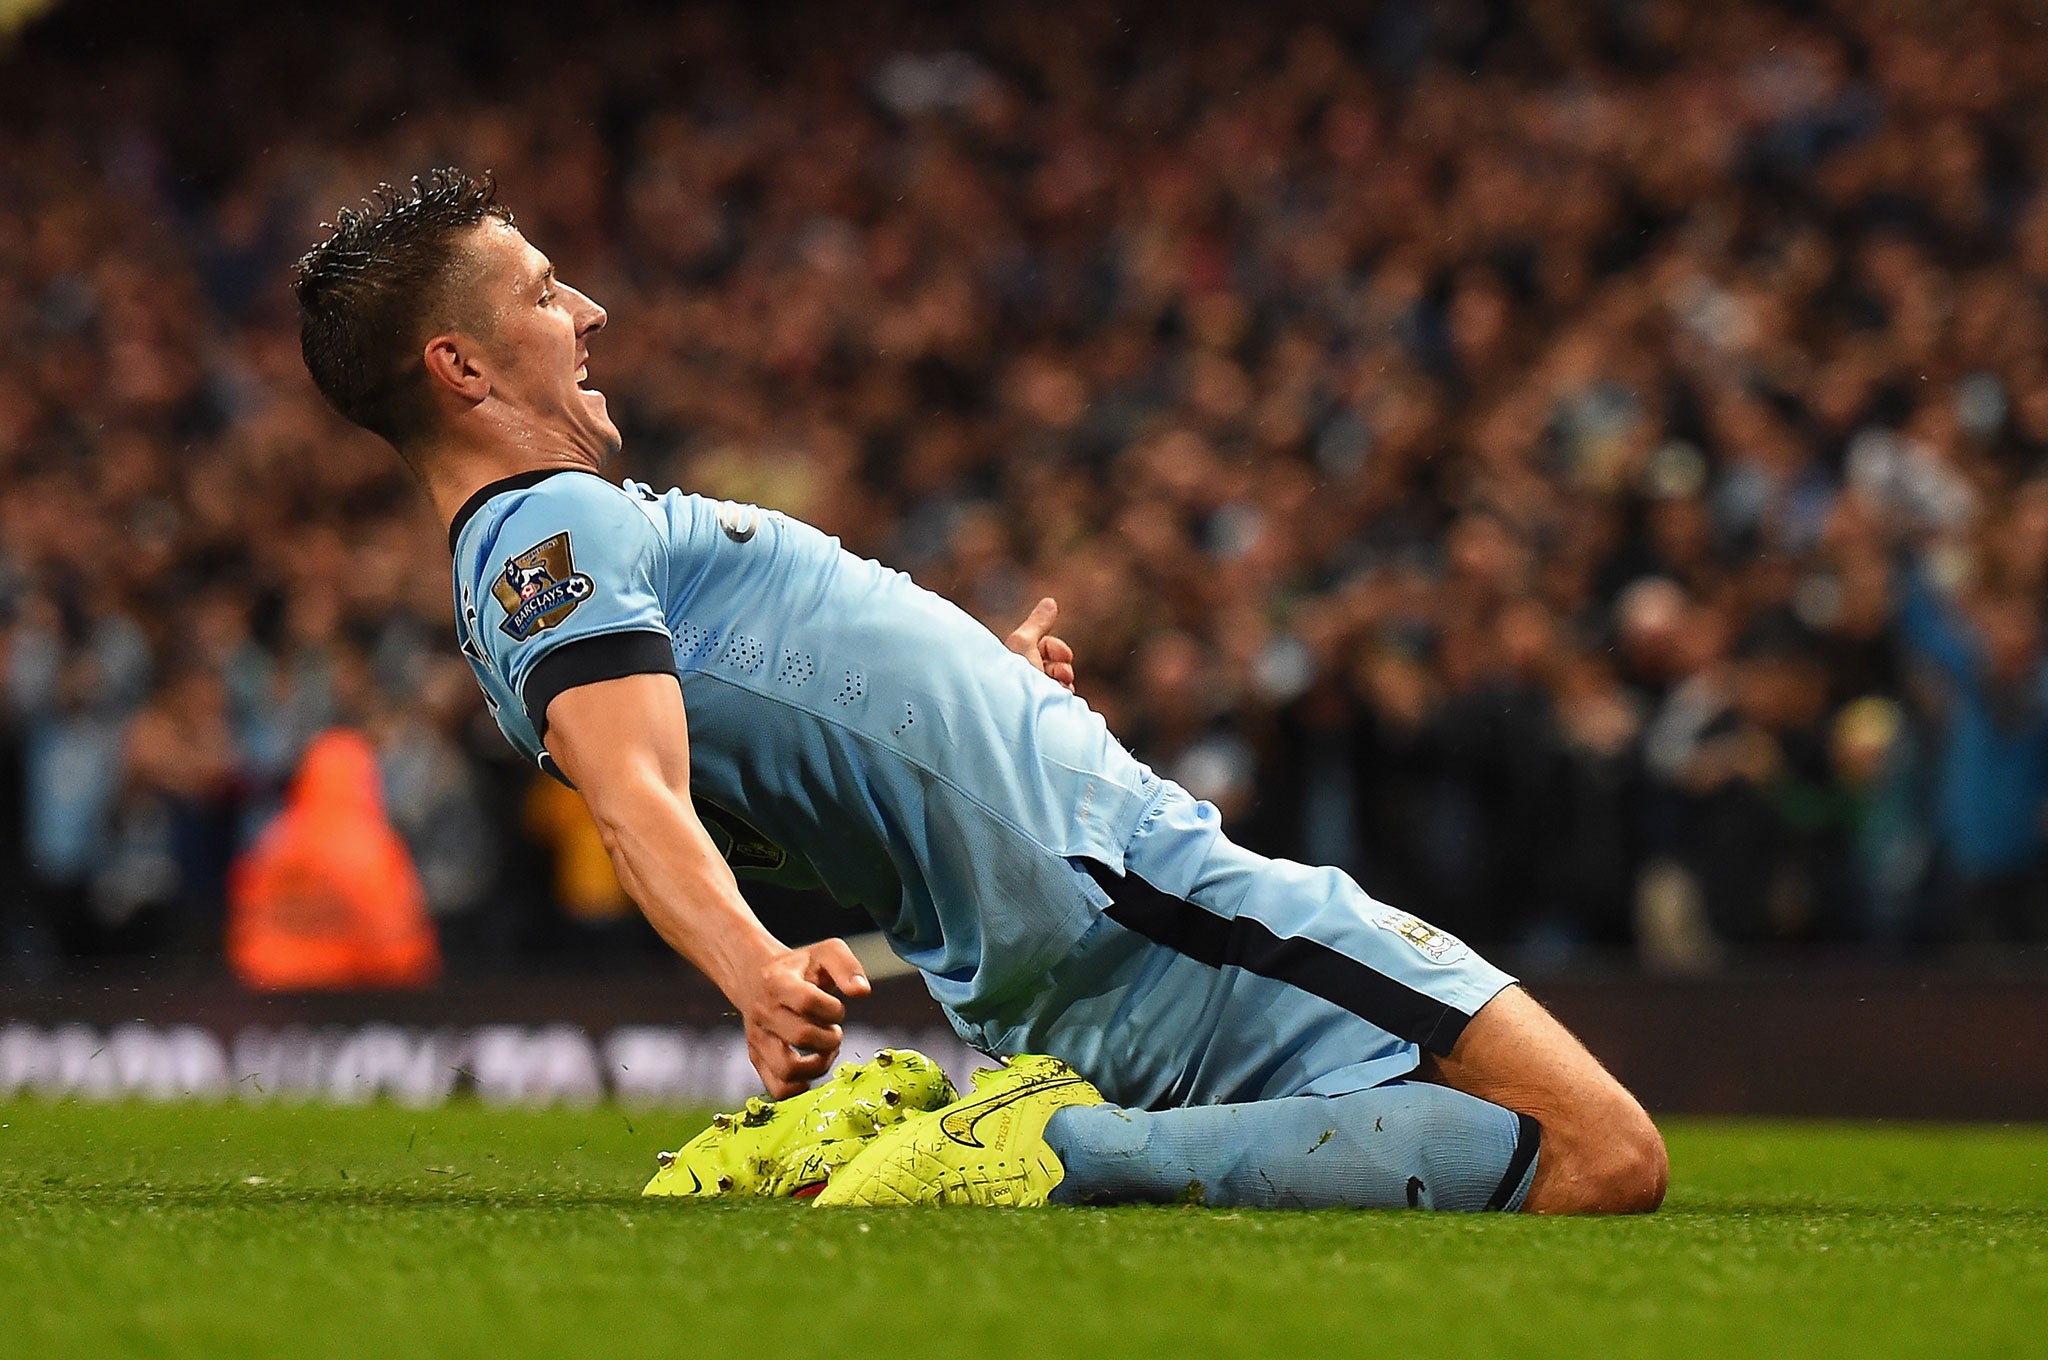 Stevan Jovetic of Manchester City celebrates scoring the opening goal during the Barclays Premier League match between Manchester City and Liverpool at the Etihad Stadium in Manchester, England